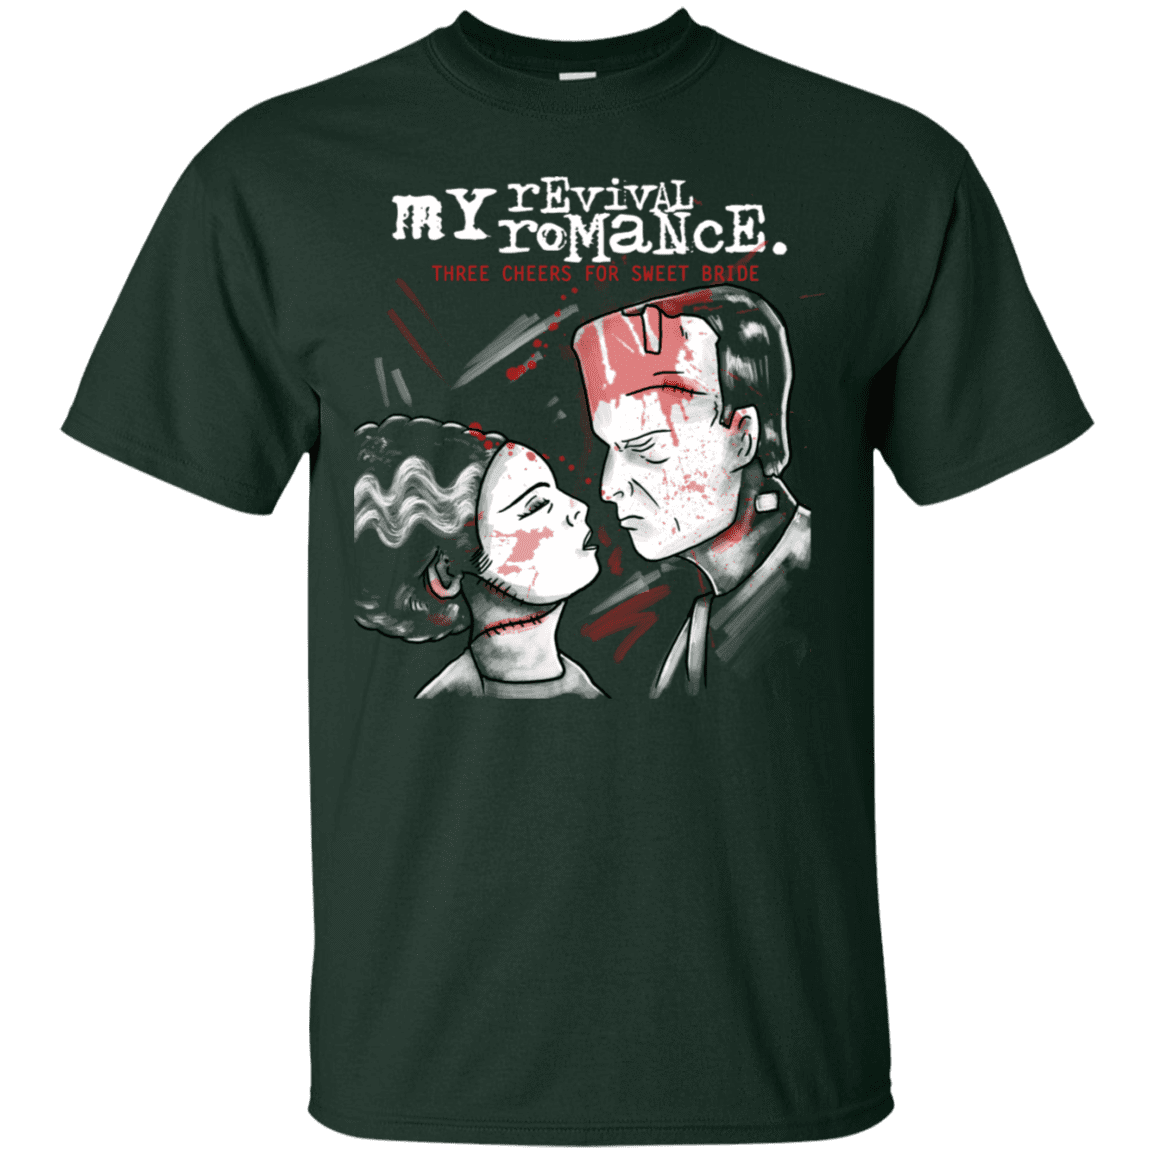 T-Shirts Forest / S My Revival Romance T-Shirt